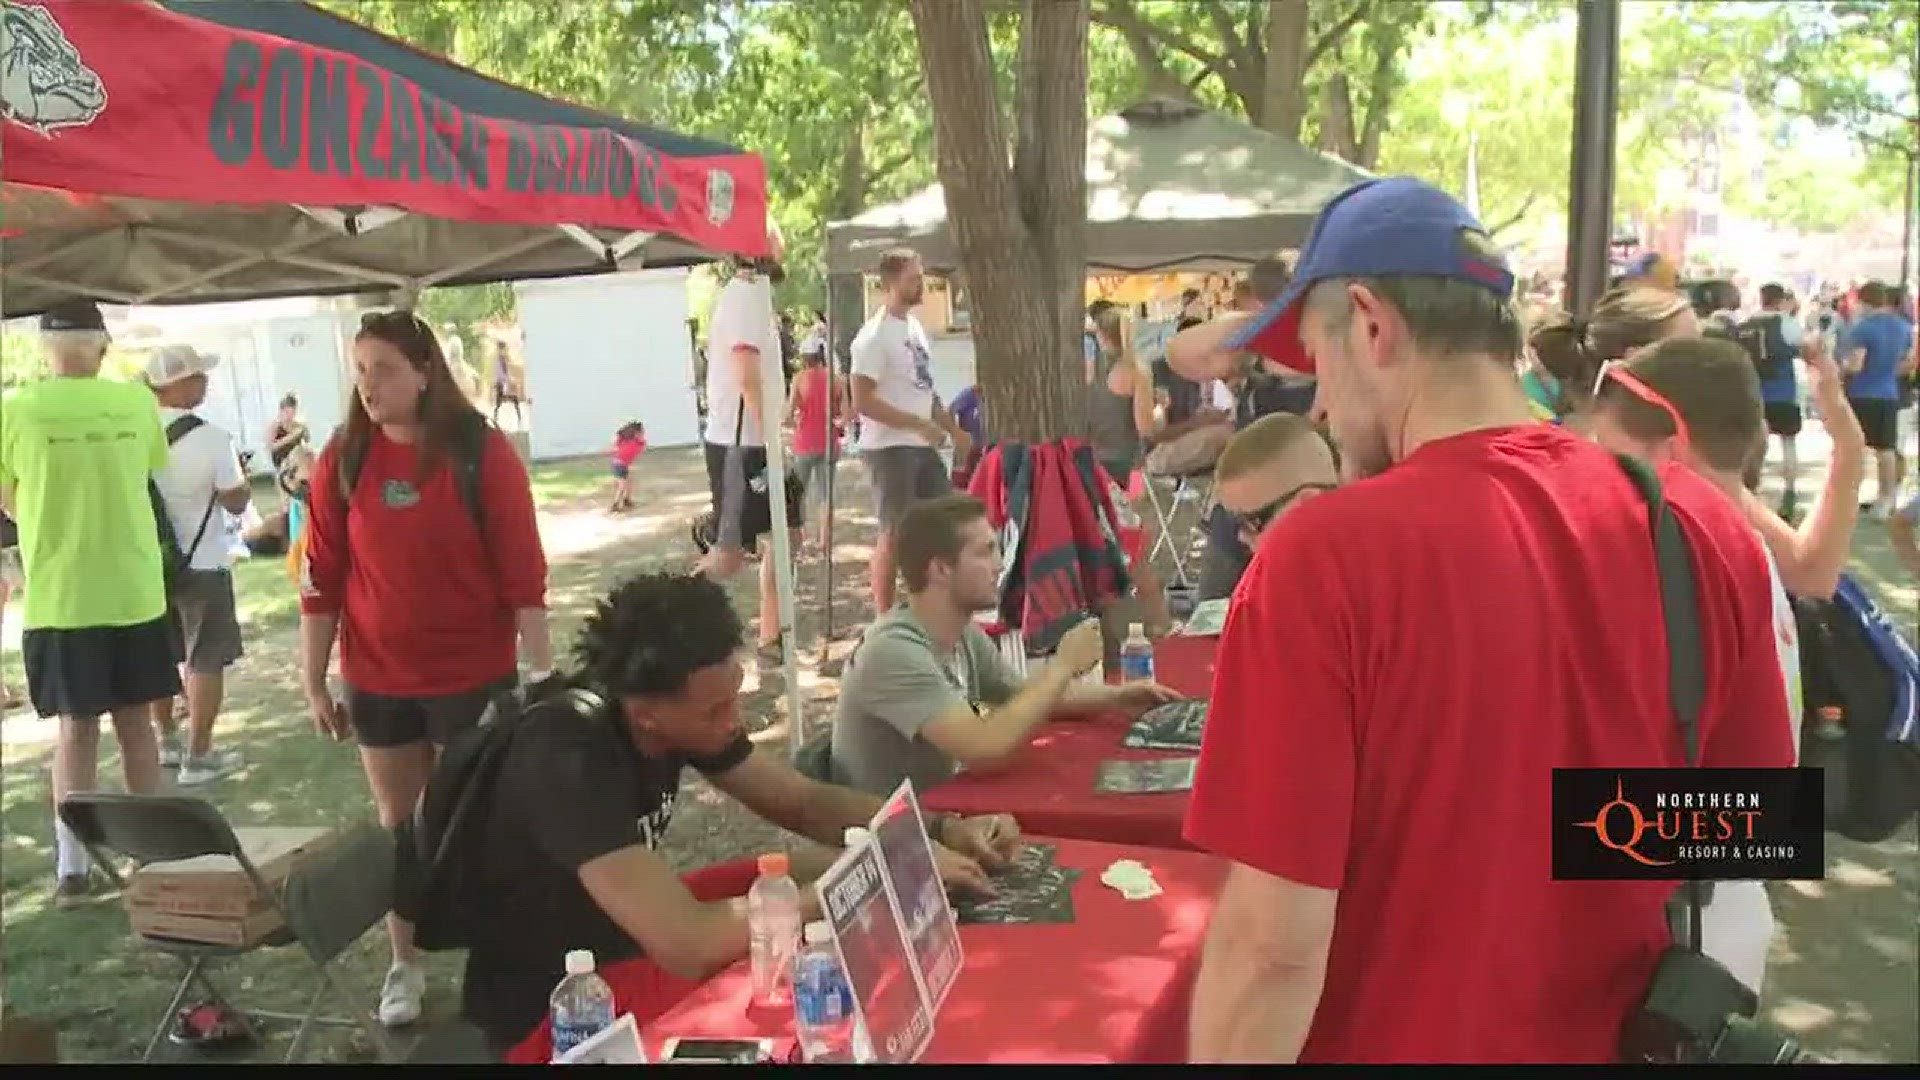 The Gonzaga basketball teams hung out at Hoopfest greeting fans and signing autographs.